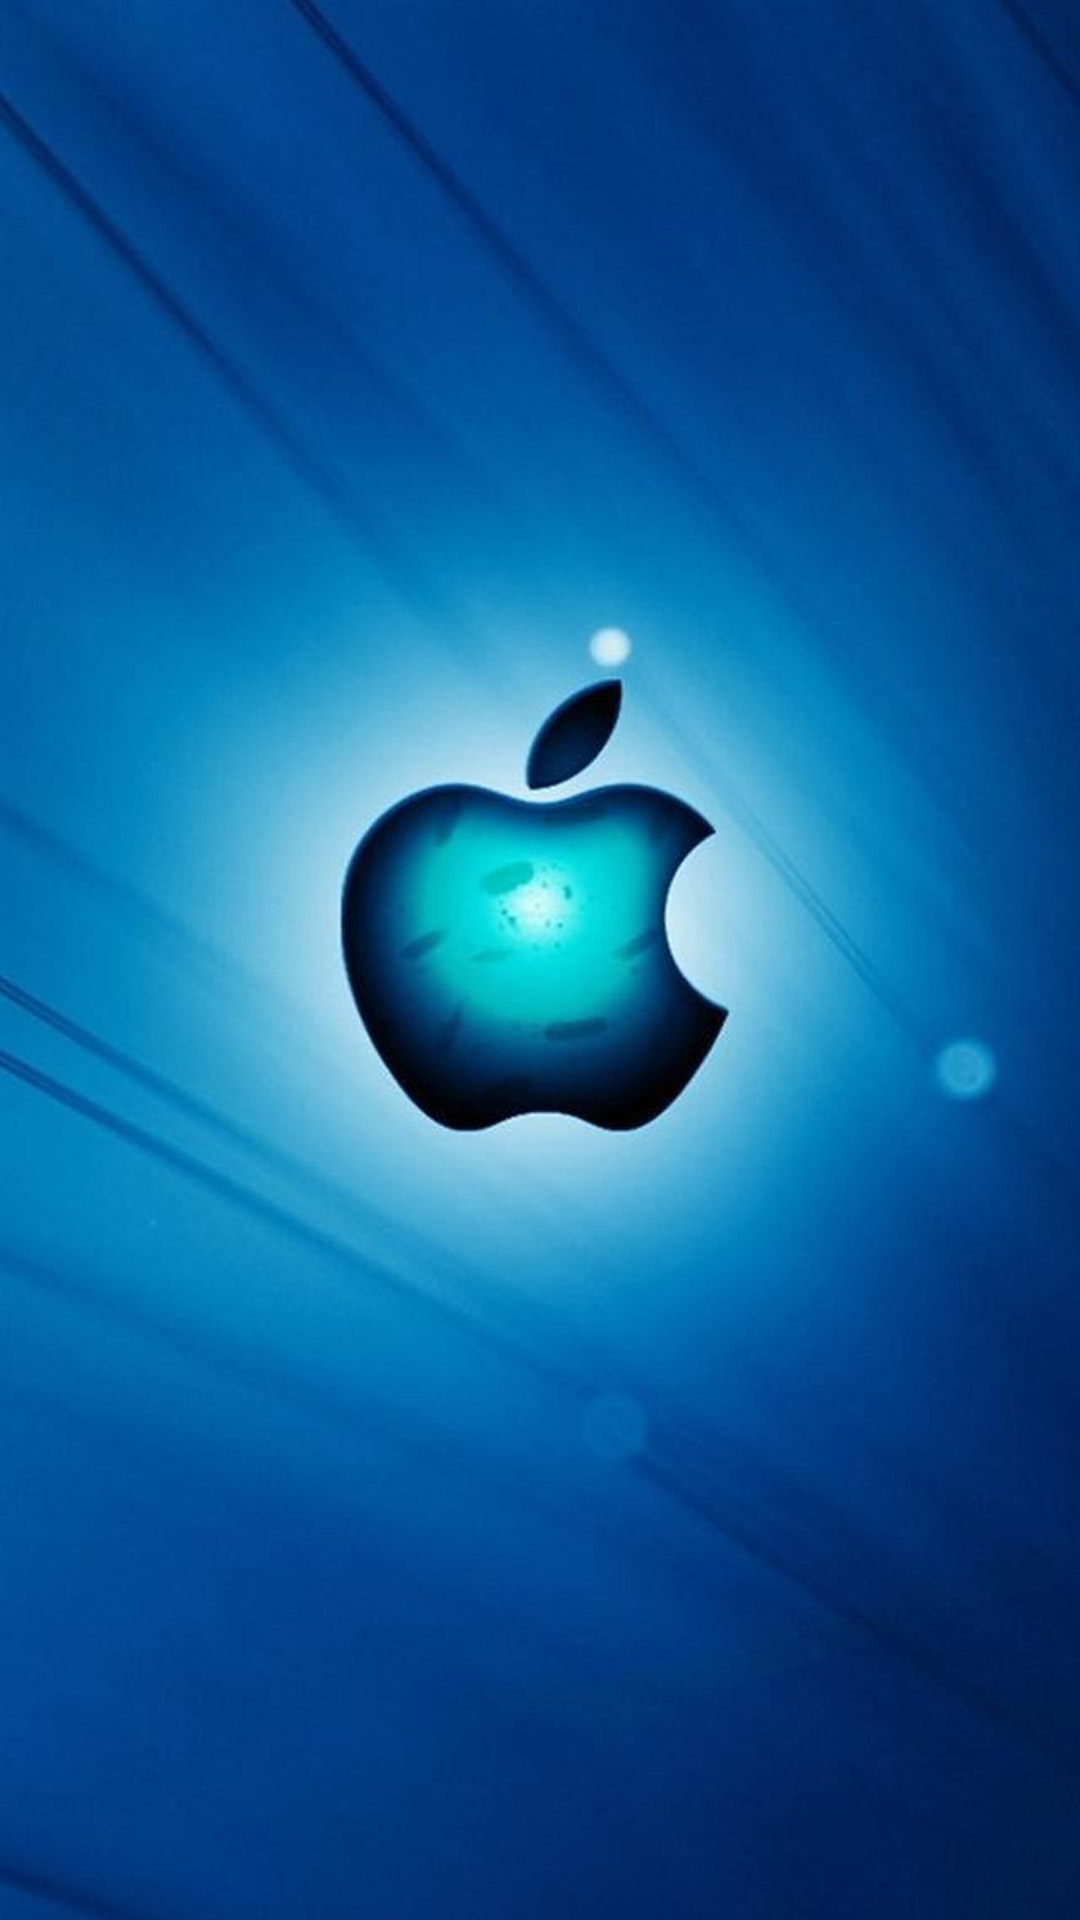 Download Free Apple Logo Background for Iphone ...